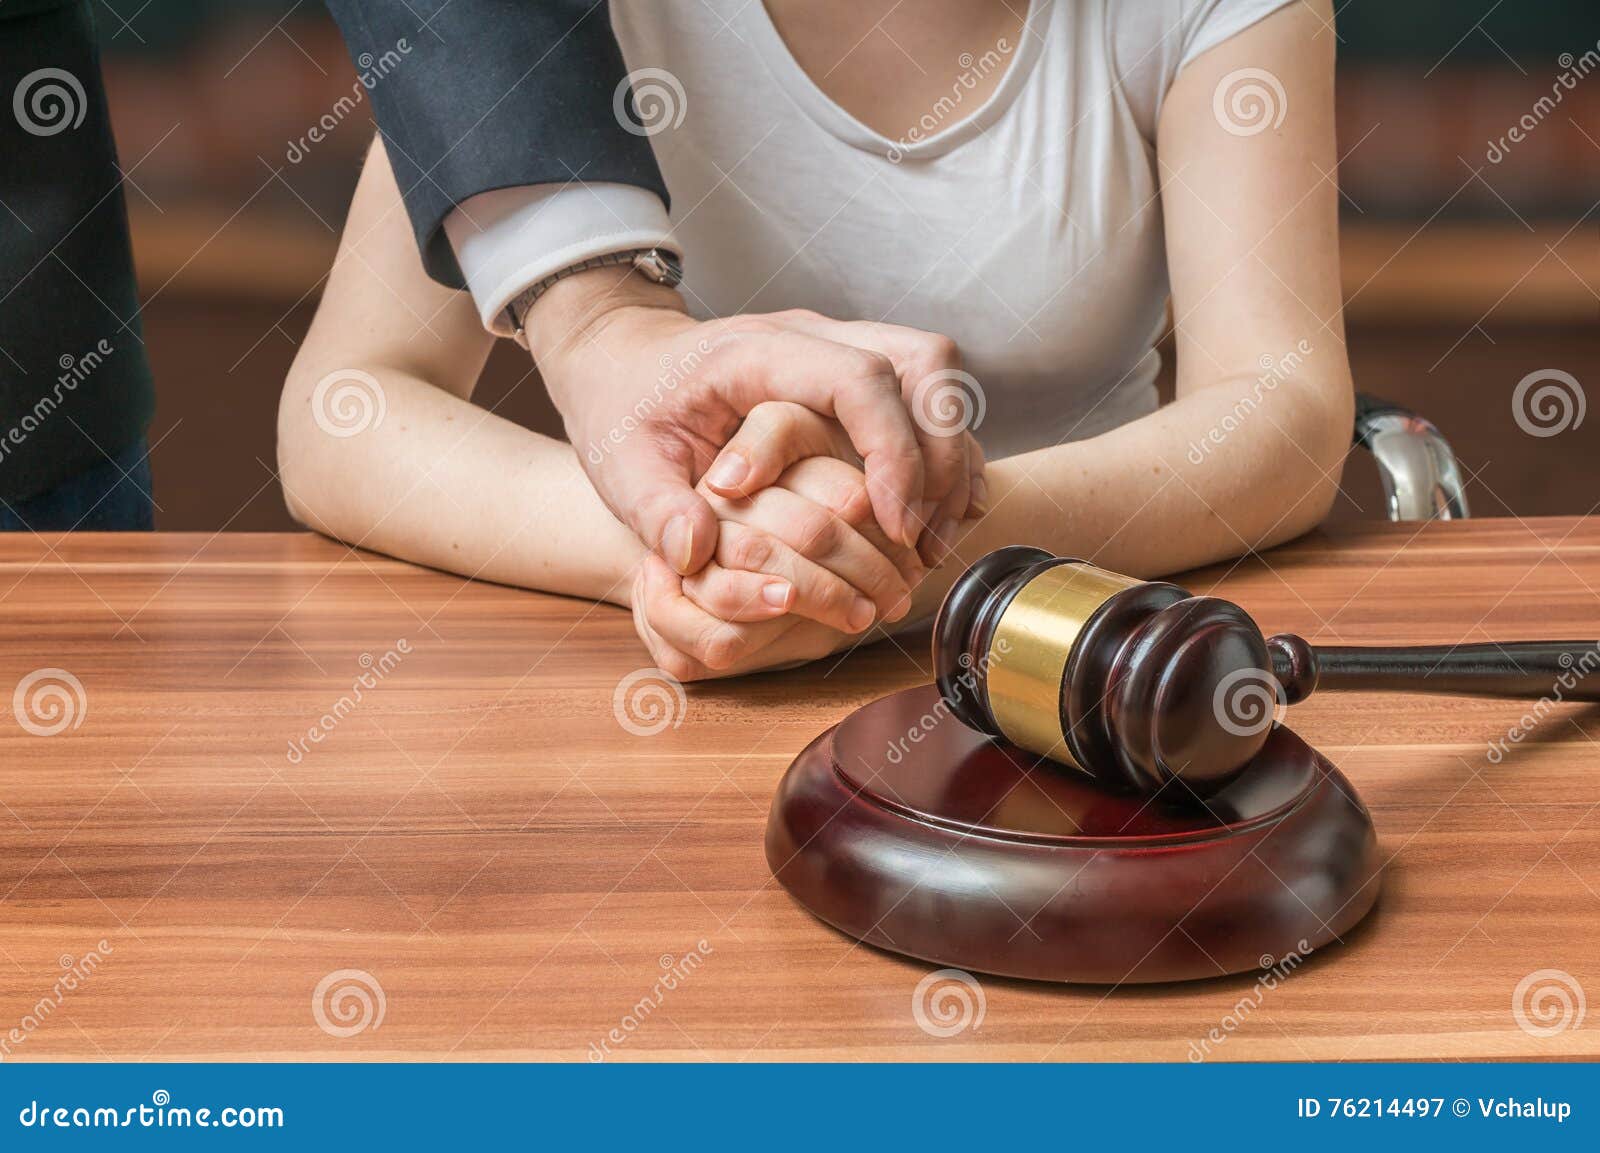 advocate or lawyer defends accused innocent woman. legal help and assistance concept